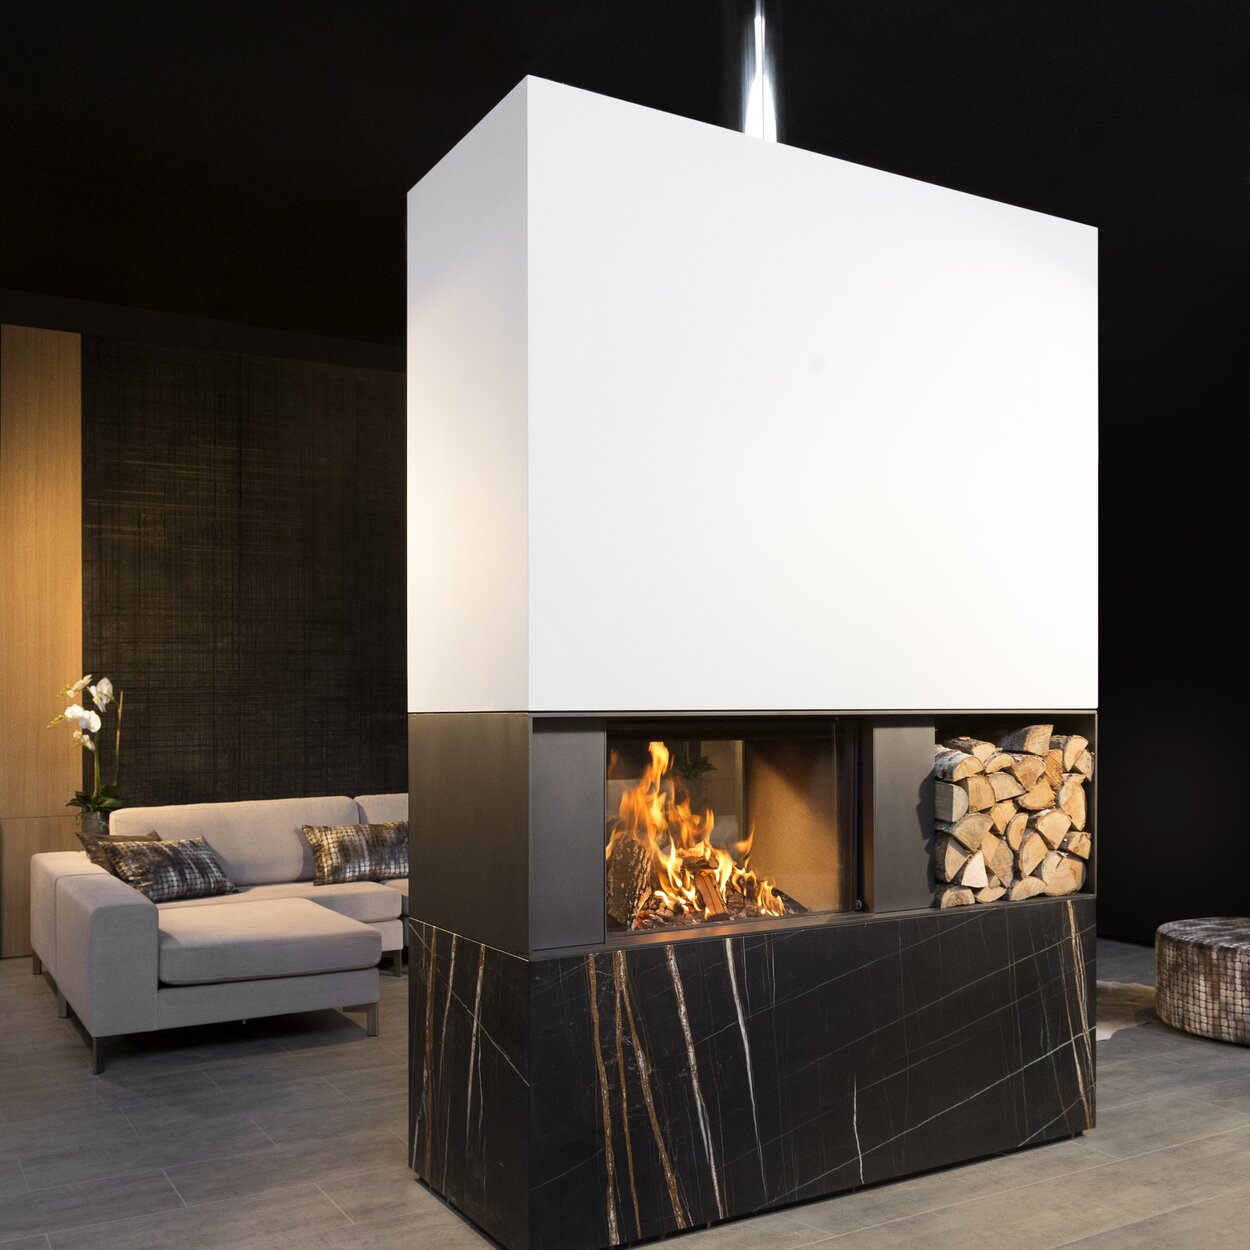 Wood fireplace W80/52T by Kalfire as a room divider with practical integrated wood storage in a modern living room